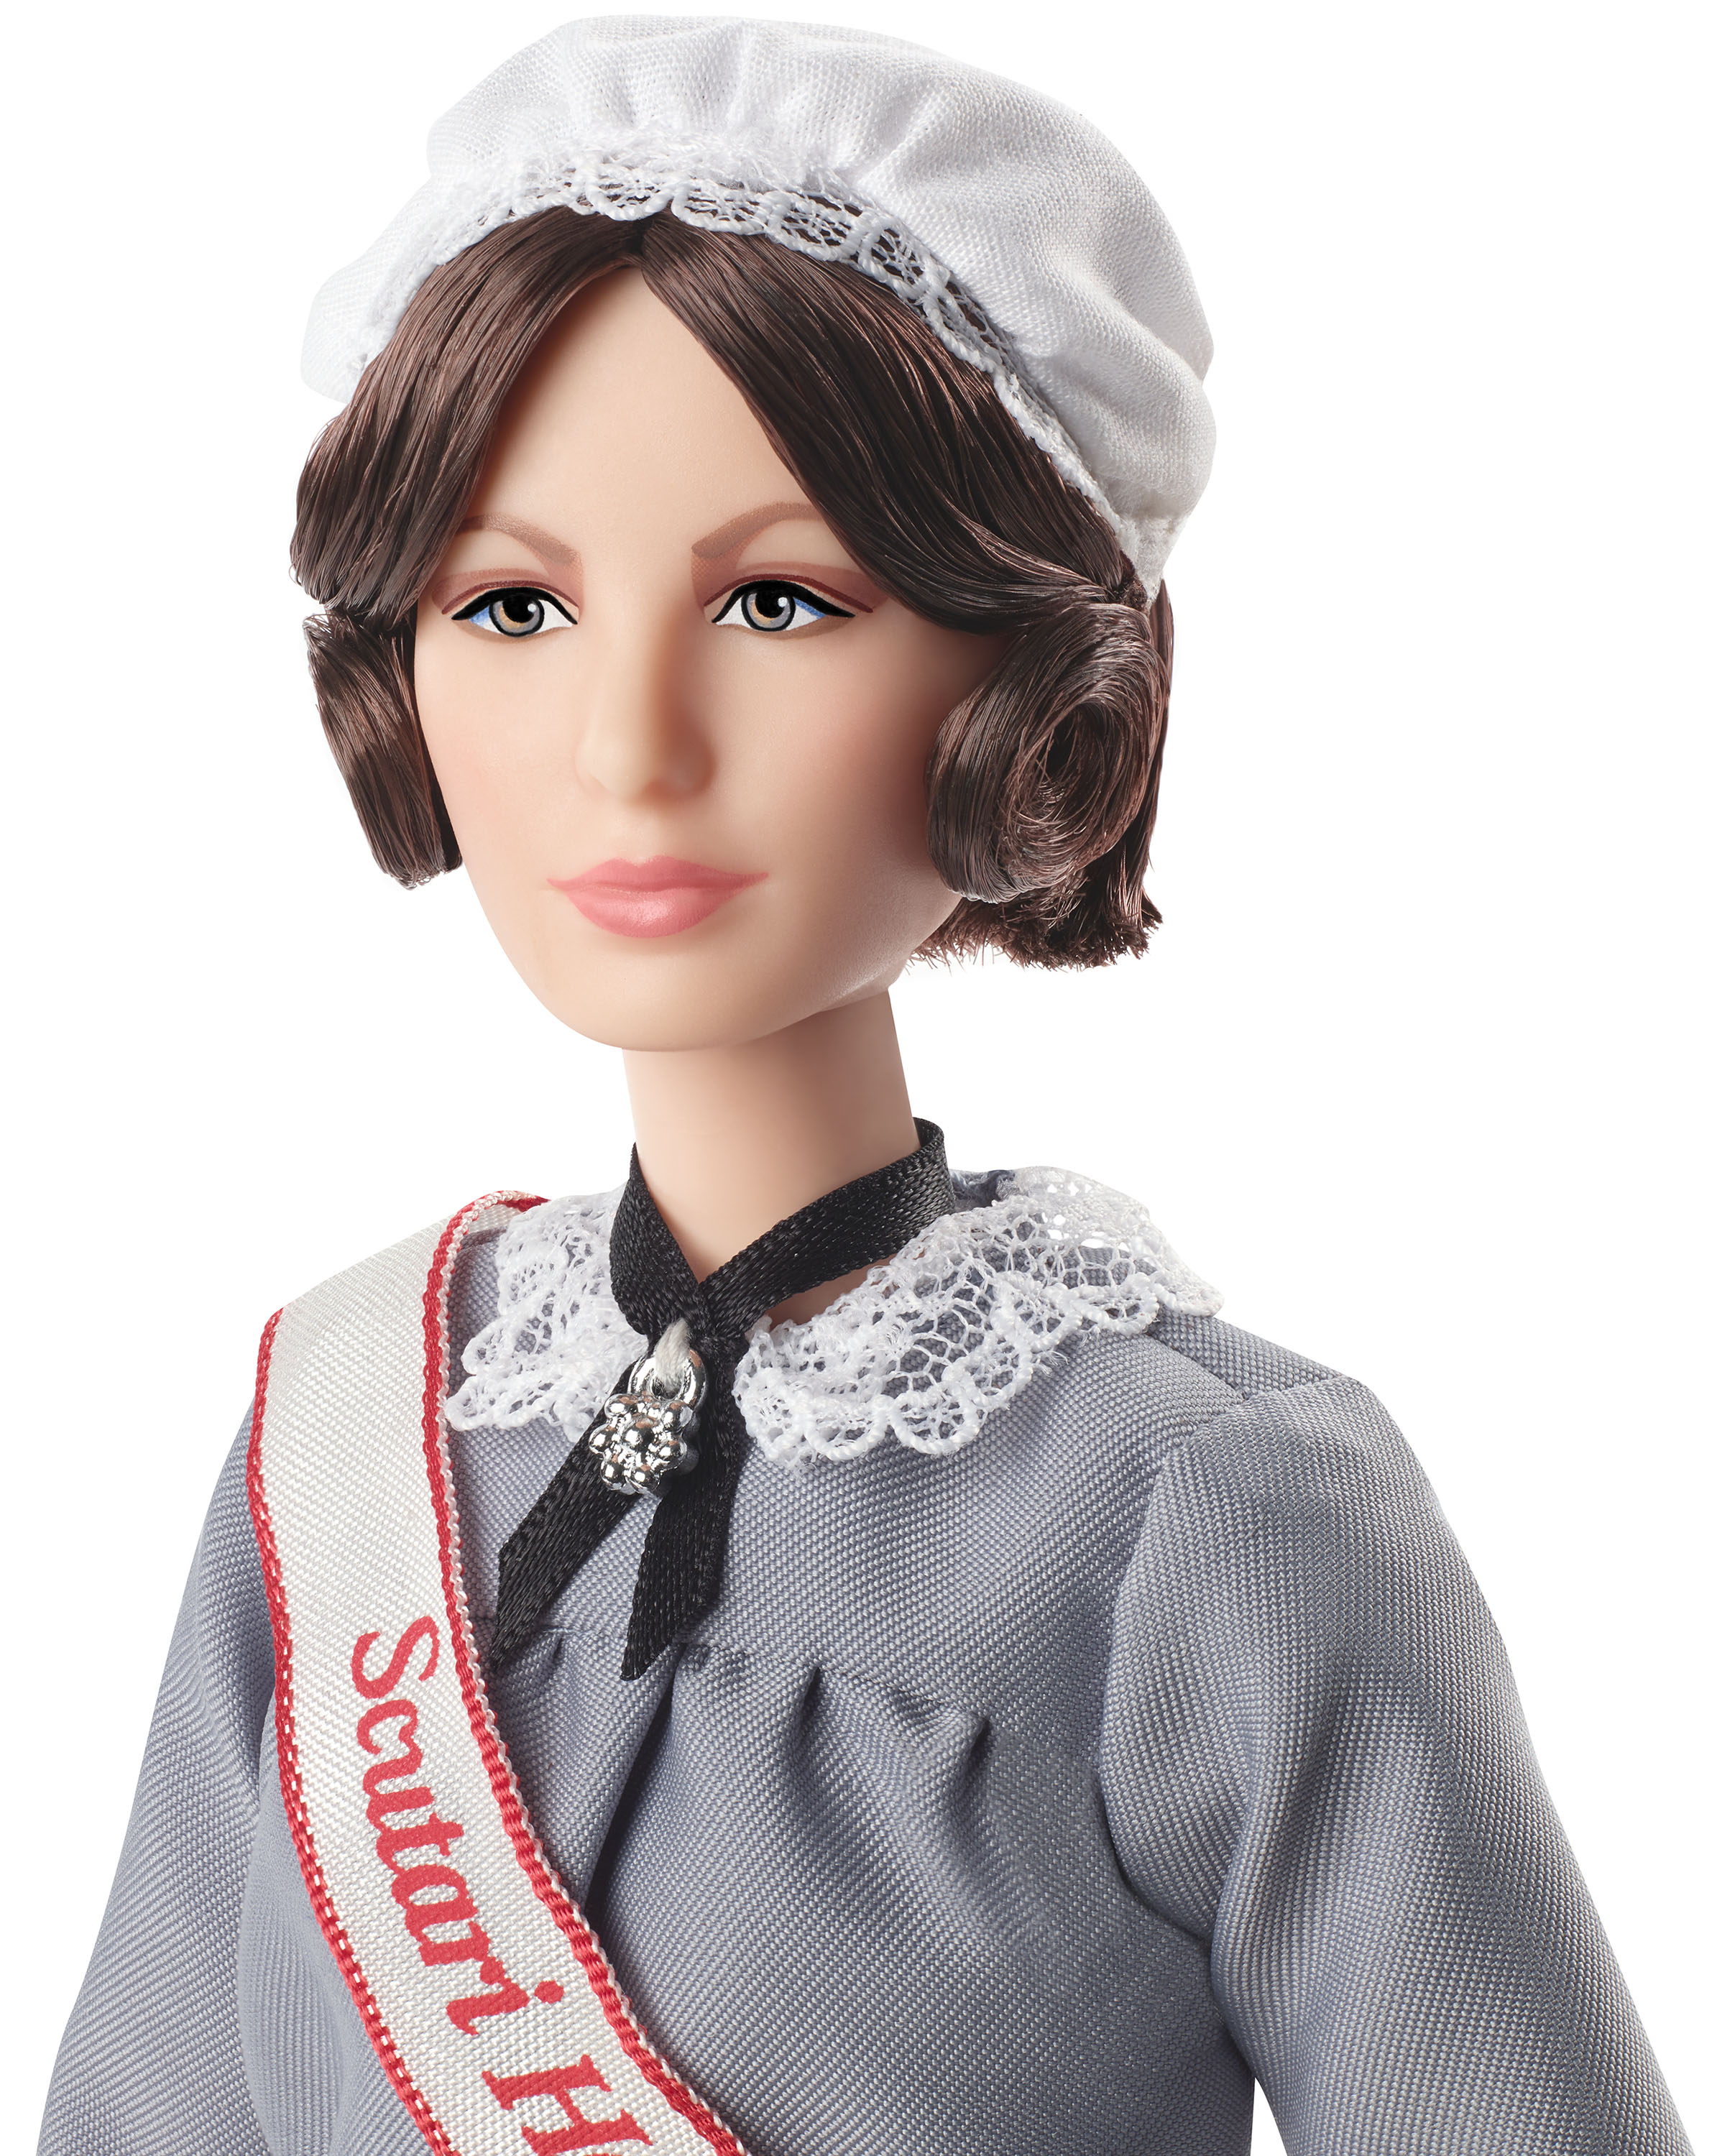 Barbie Inspiring Women Florence Nightingale Collectible Doll, Approx. 12 inch - image 4 of 7